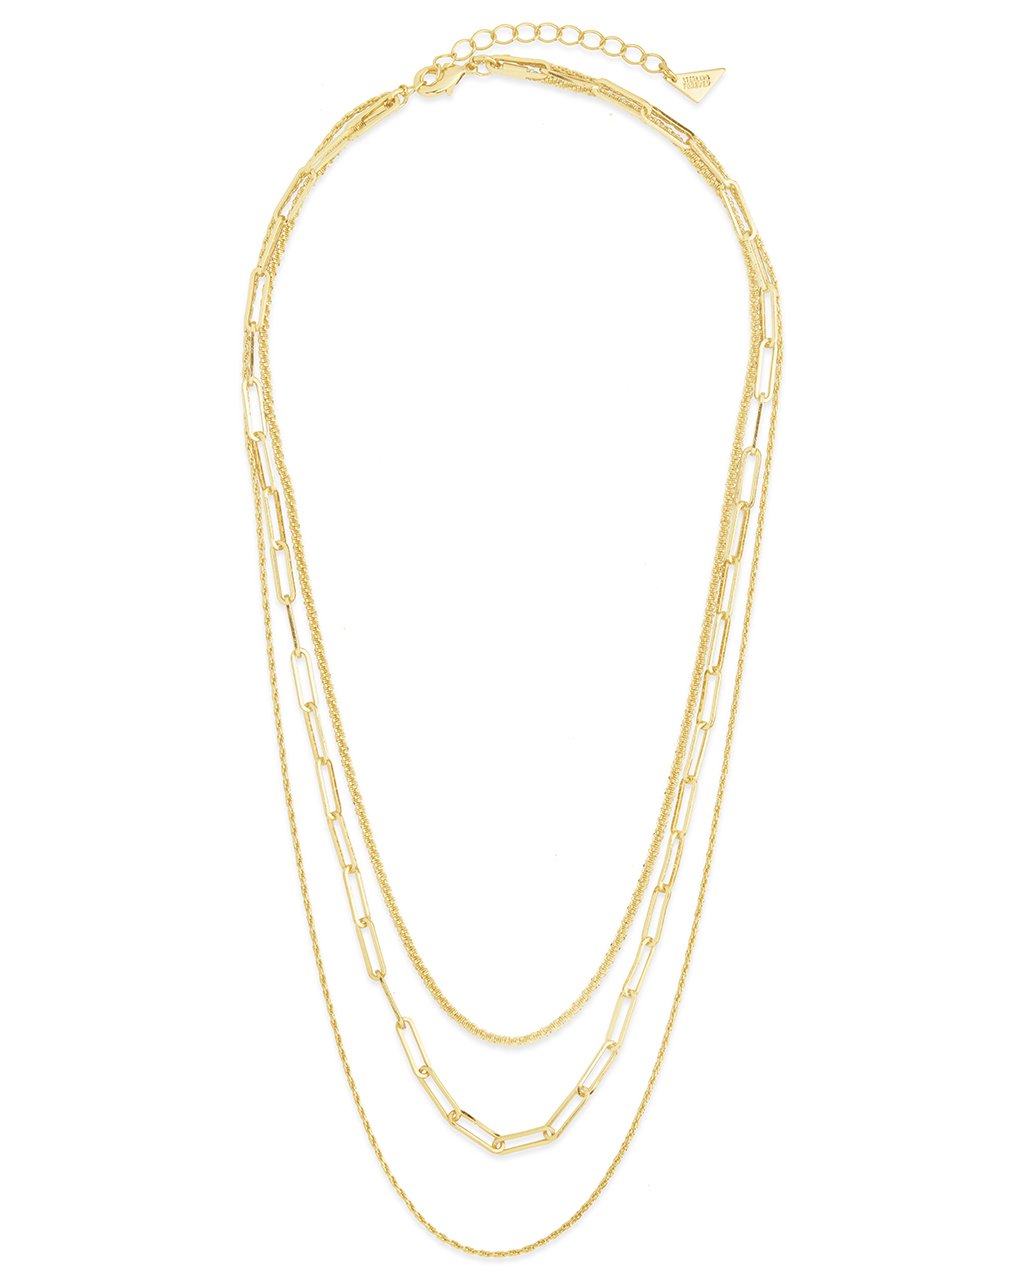 Kori Triple Layered Necklace Necklace Sterling Forever 